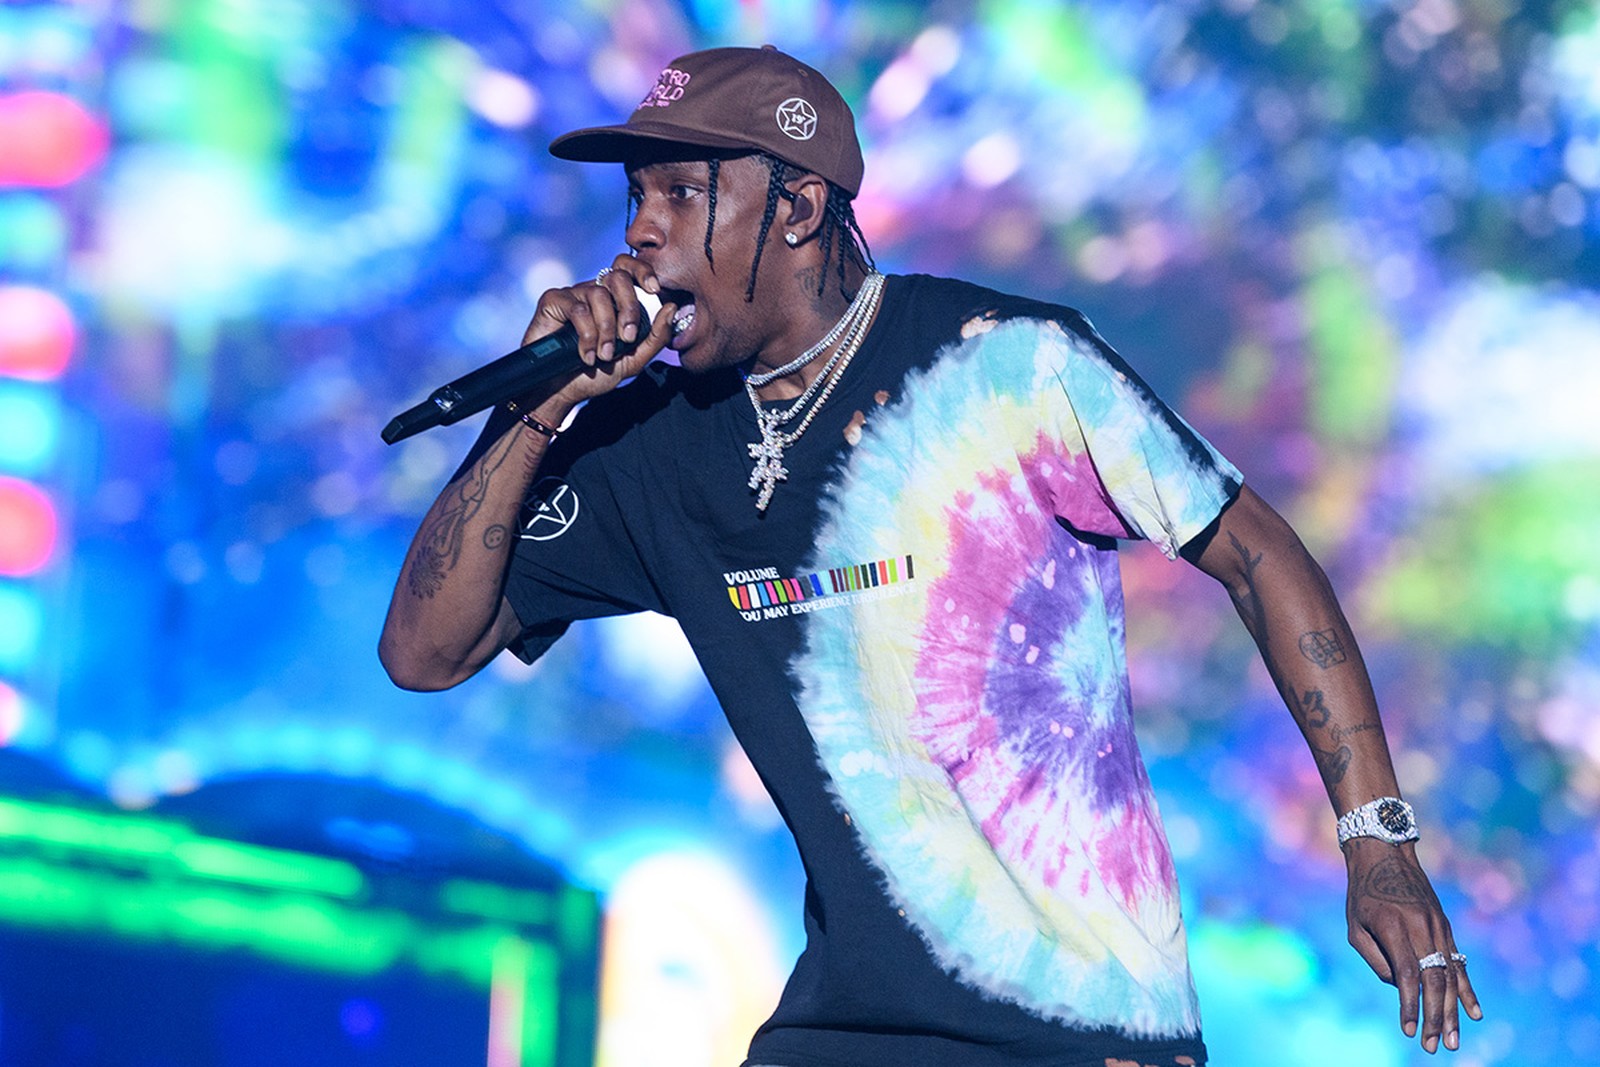 Travis Scott lands Las Vegas residency one year after Astroworld incident